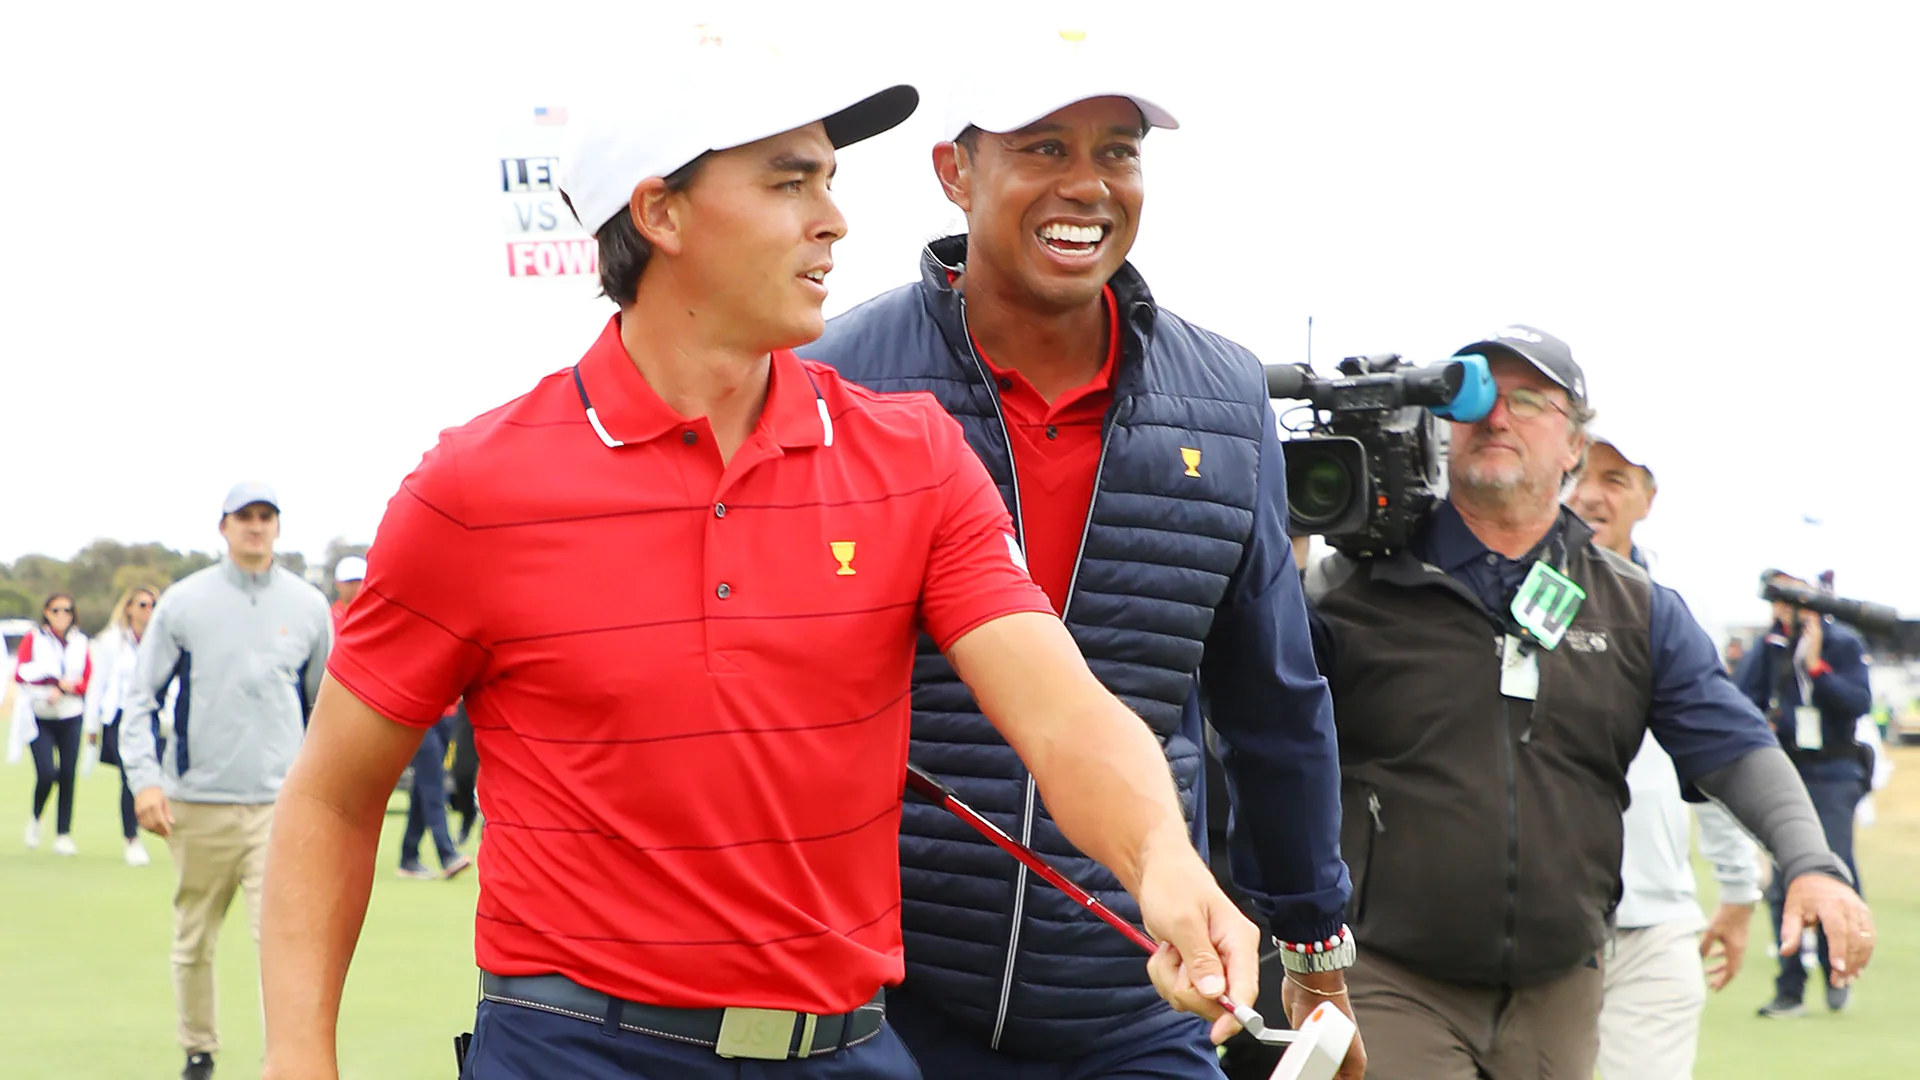 Rickie Fowler talks about watching Masters first round with Tiger Woods